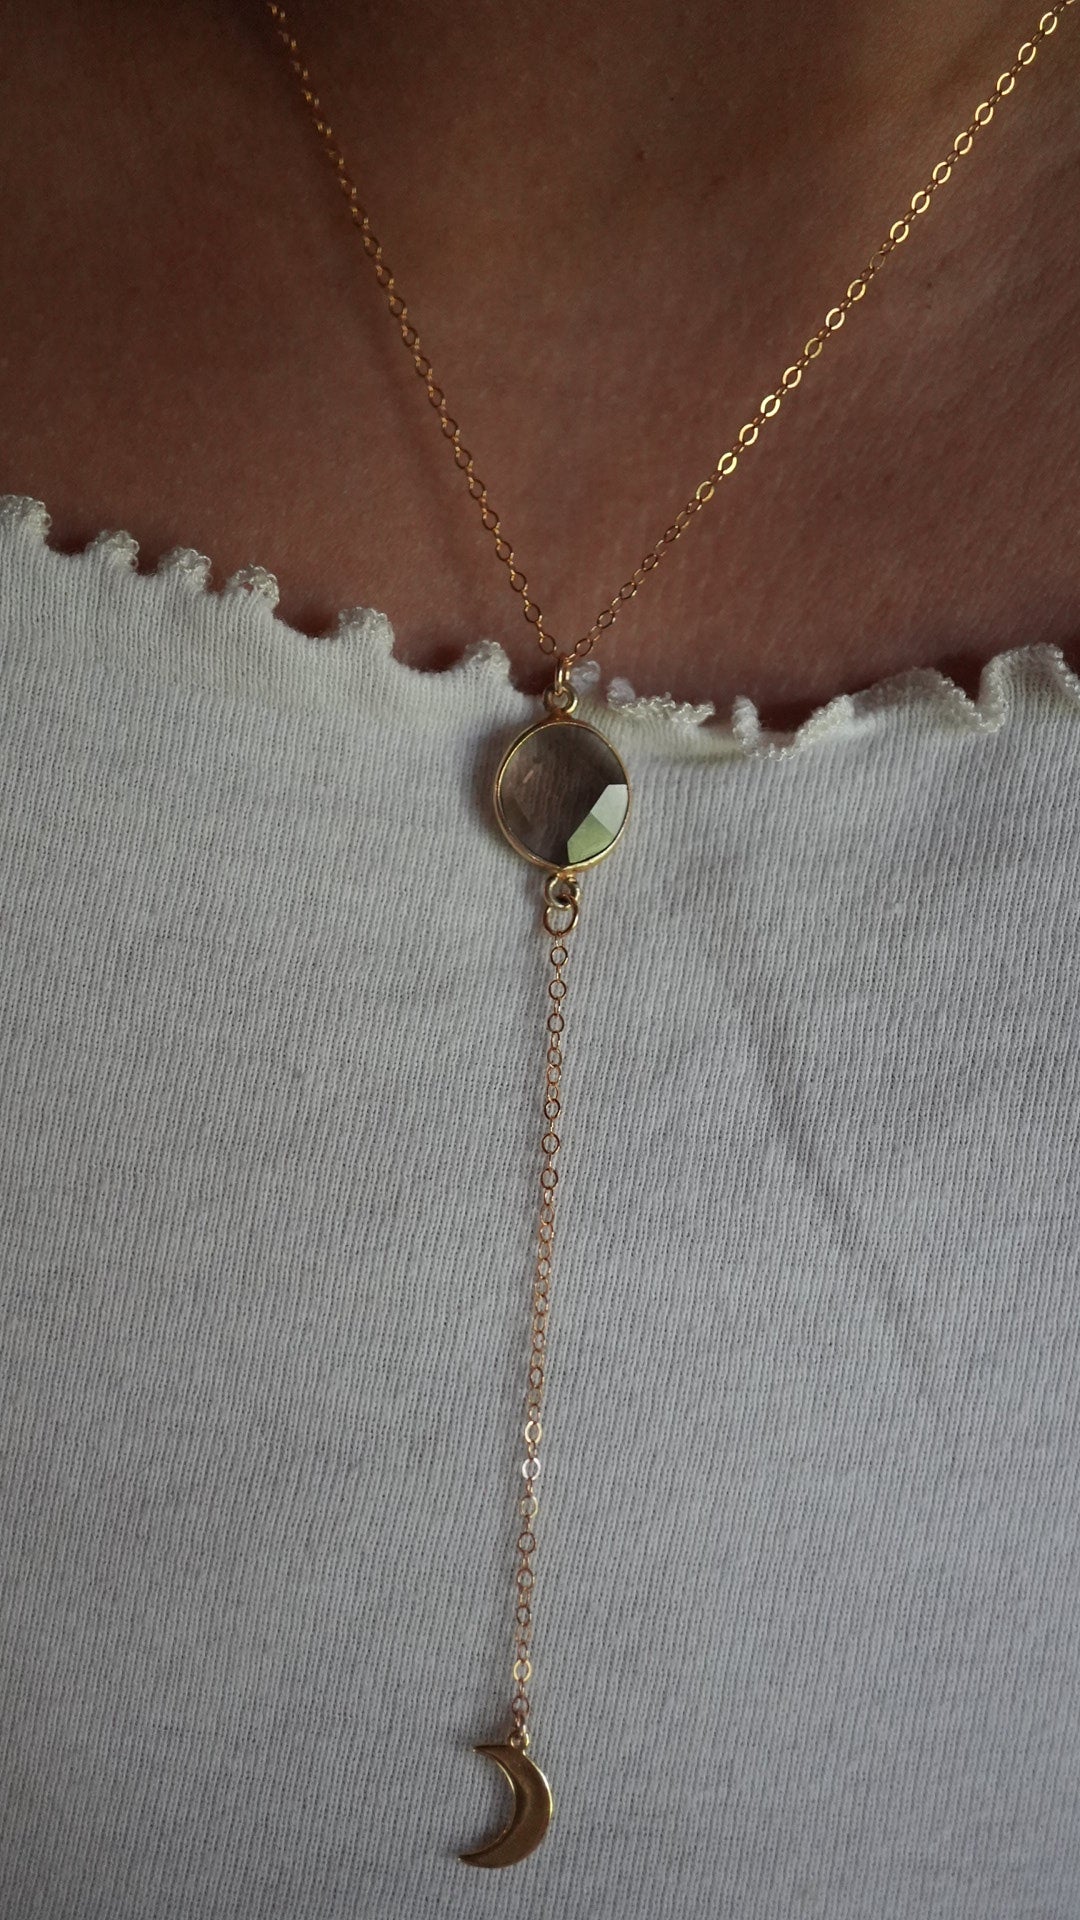 Gold Filled Smokey Quartz Crescent Moon Necklace || Layering Necklace